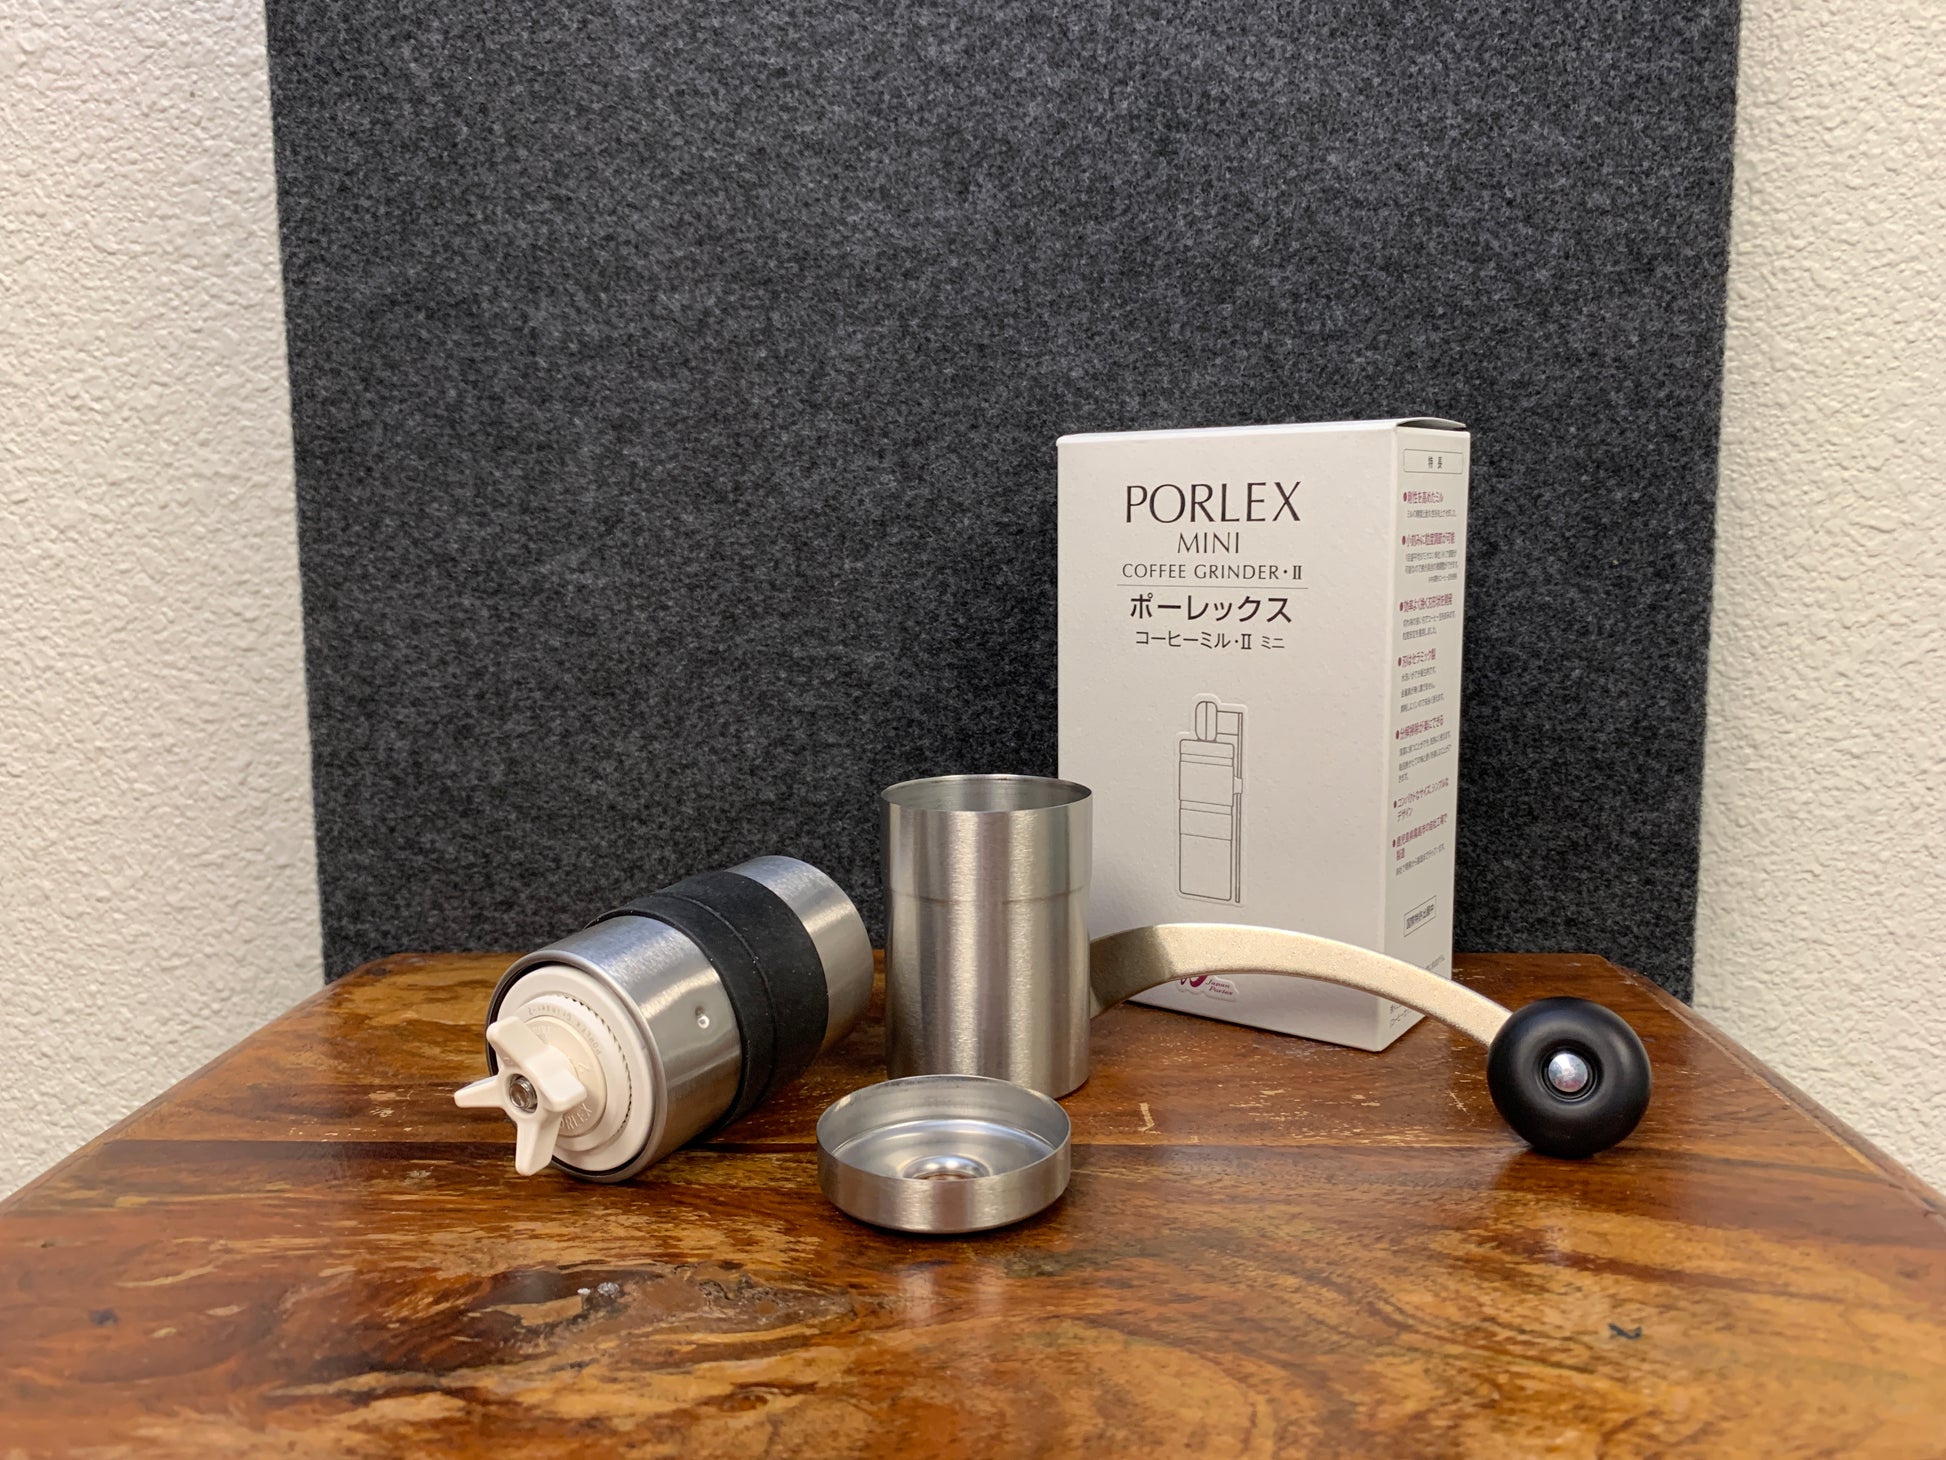 Porlex Tall Grinder ii - Easy to use, Durable, Consistent grind